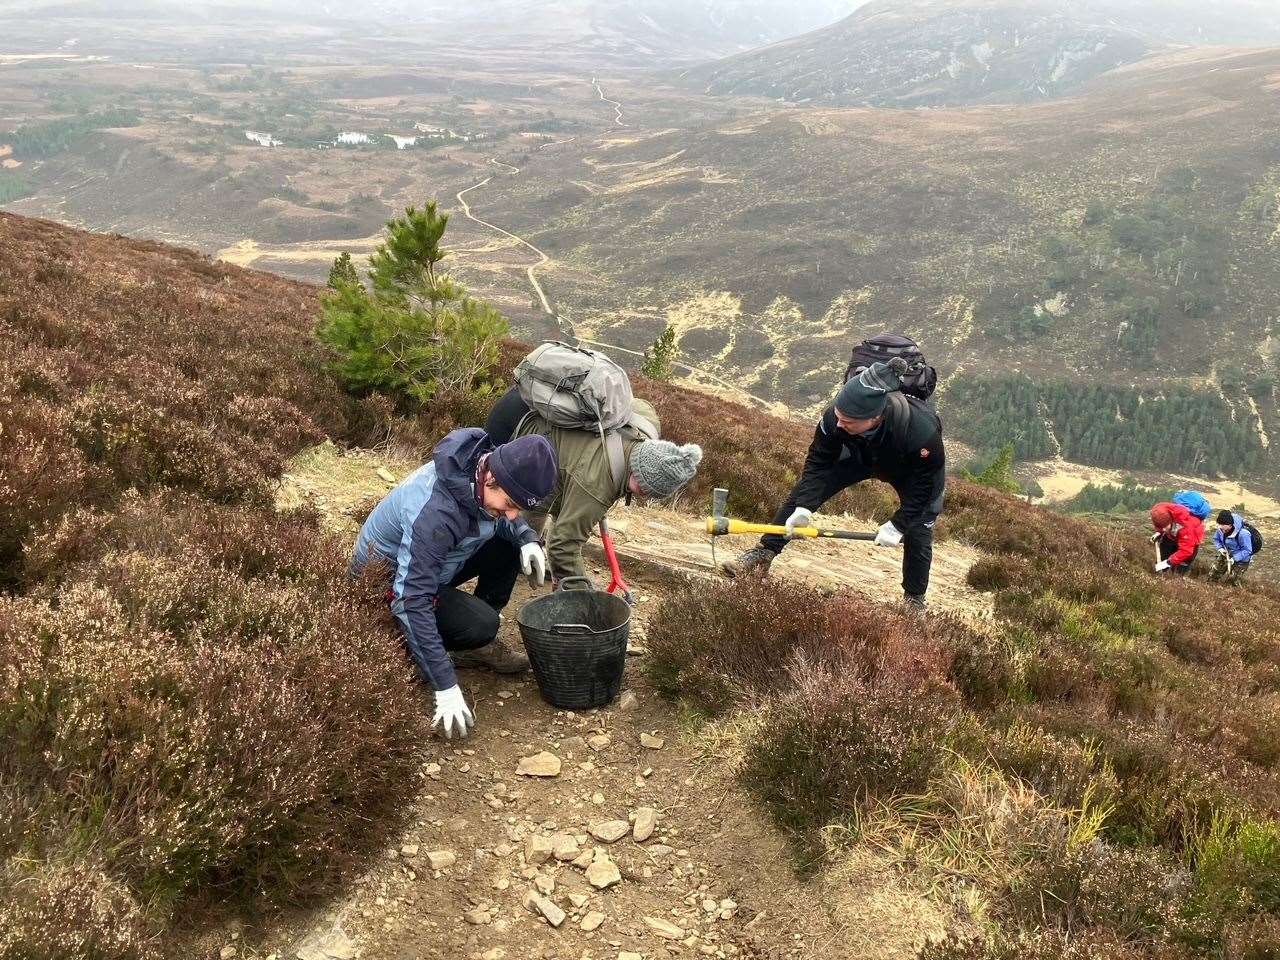 Volunteers from the Icelandic National Park system took to the slopes of Meall a’ Bhuachaille recently to learn about path maintenance and carry out repairs along the way. Picture: Ewan Watson / Outdoor Access Trust for Scotland